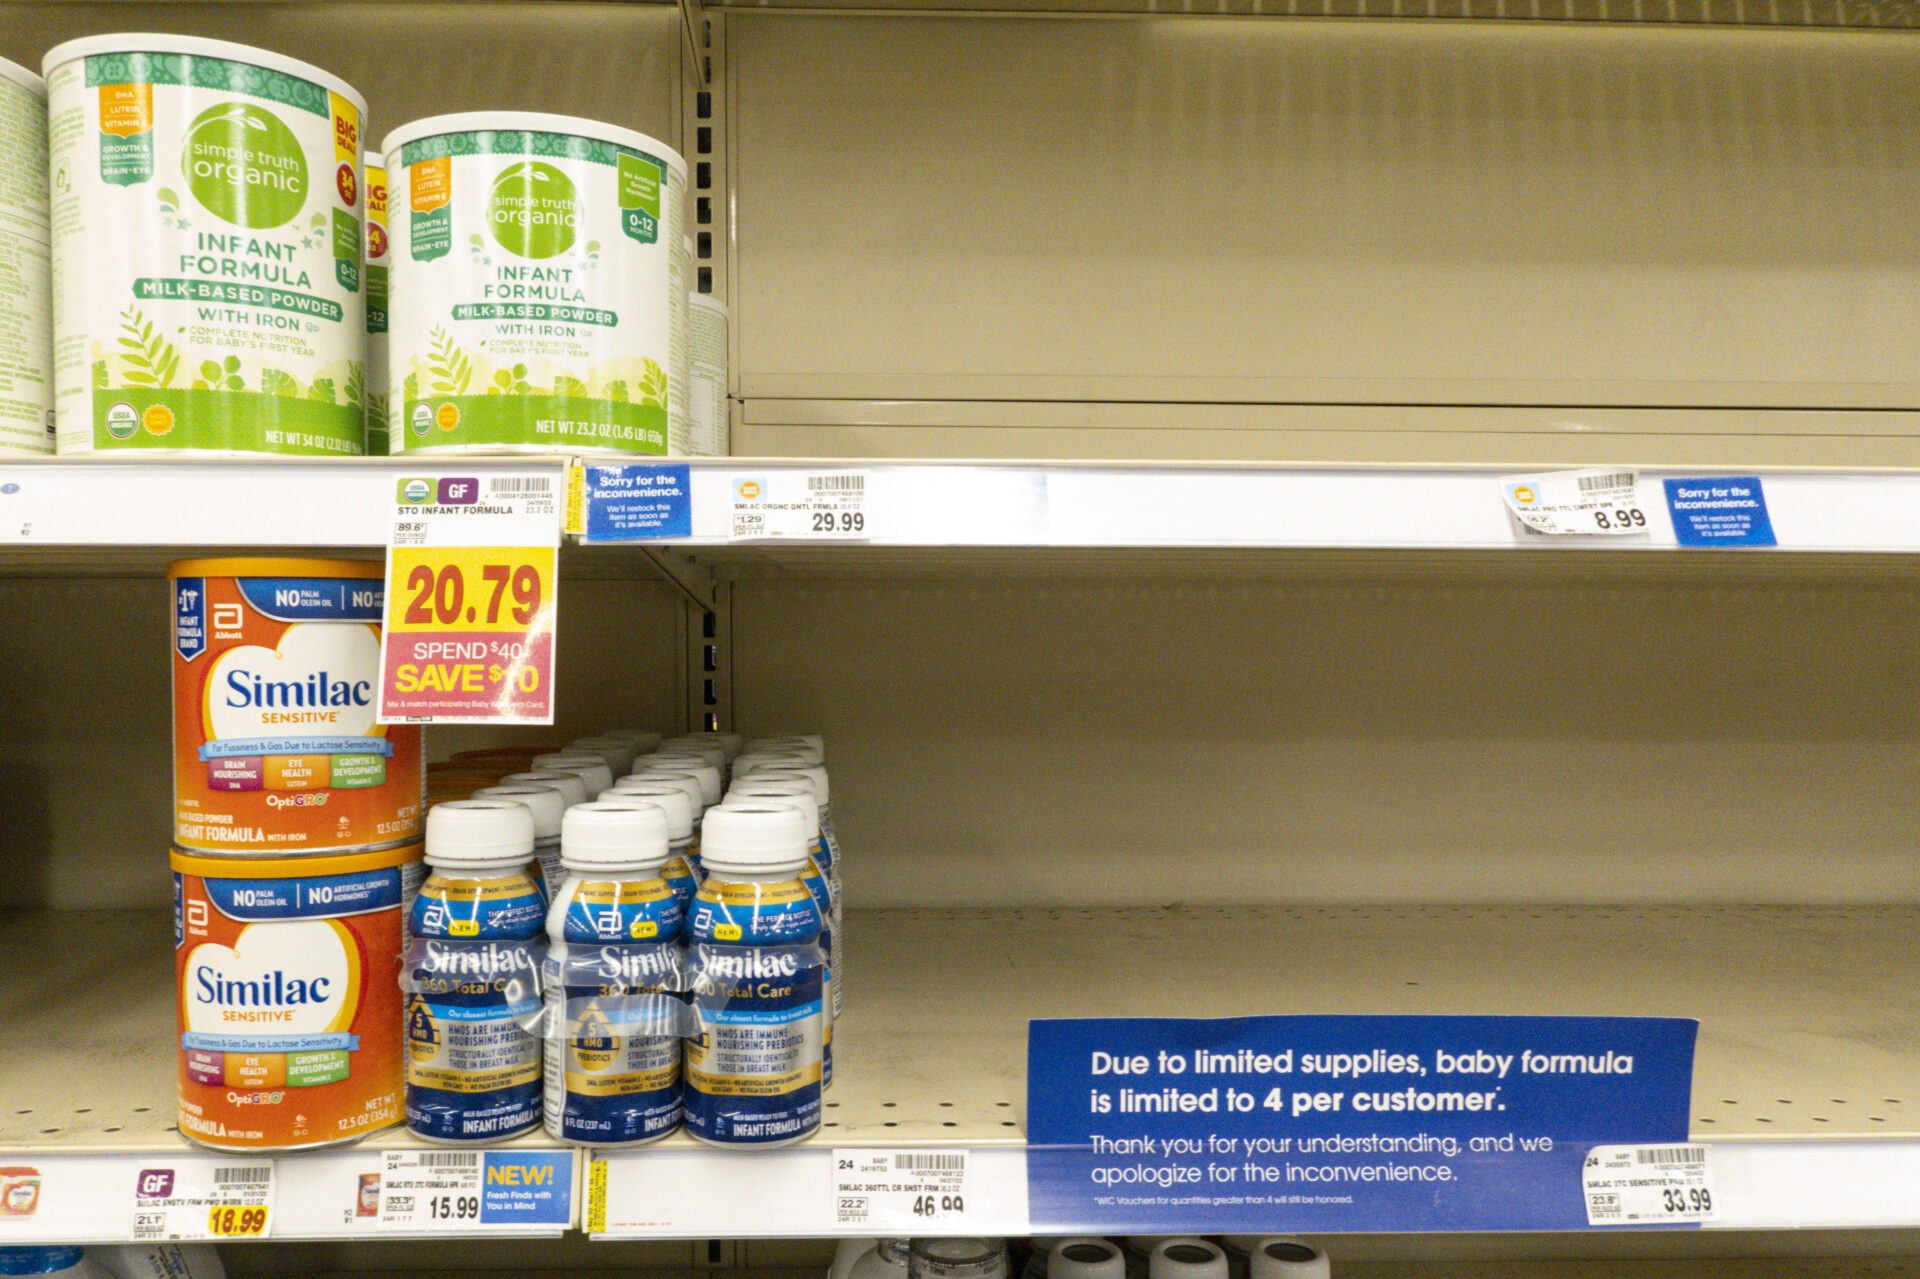 Baby formula is displayed on the shelves of a grocery store with a sign limiting purchases in Indianapolis.